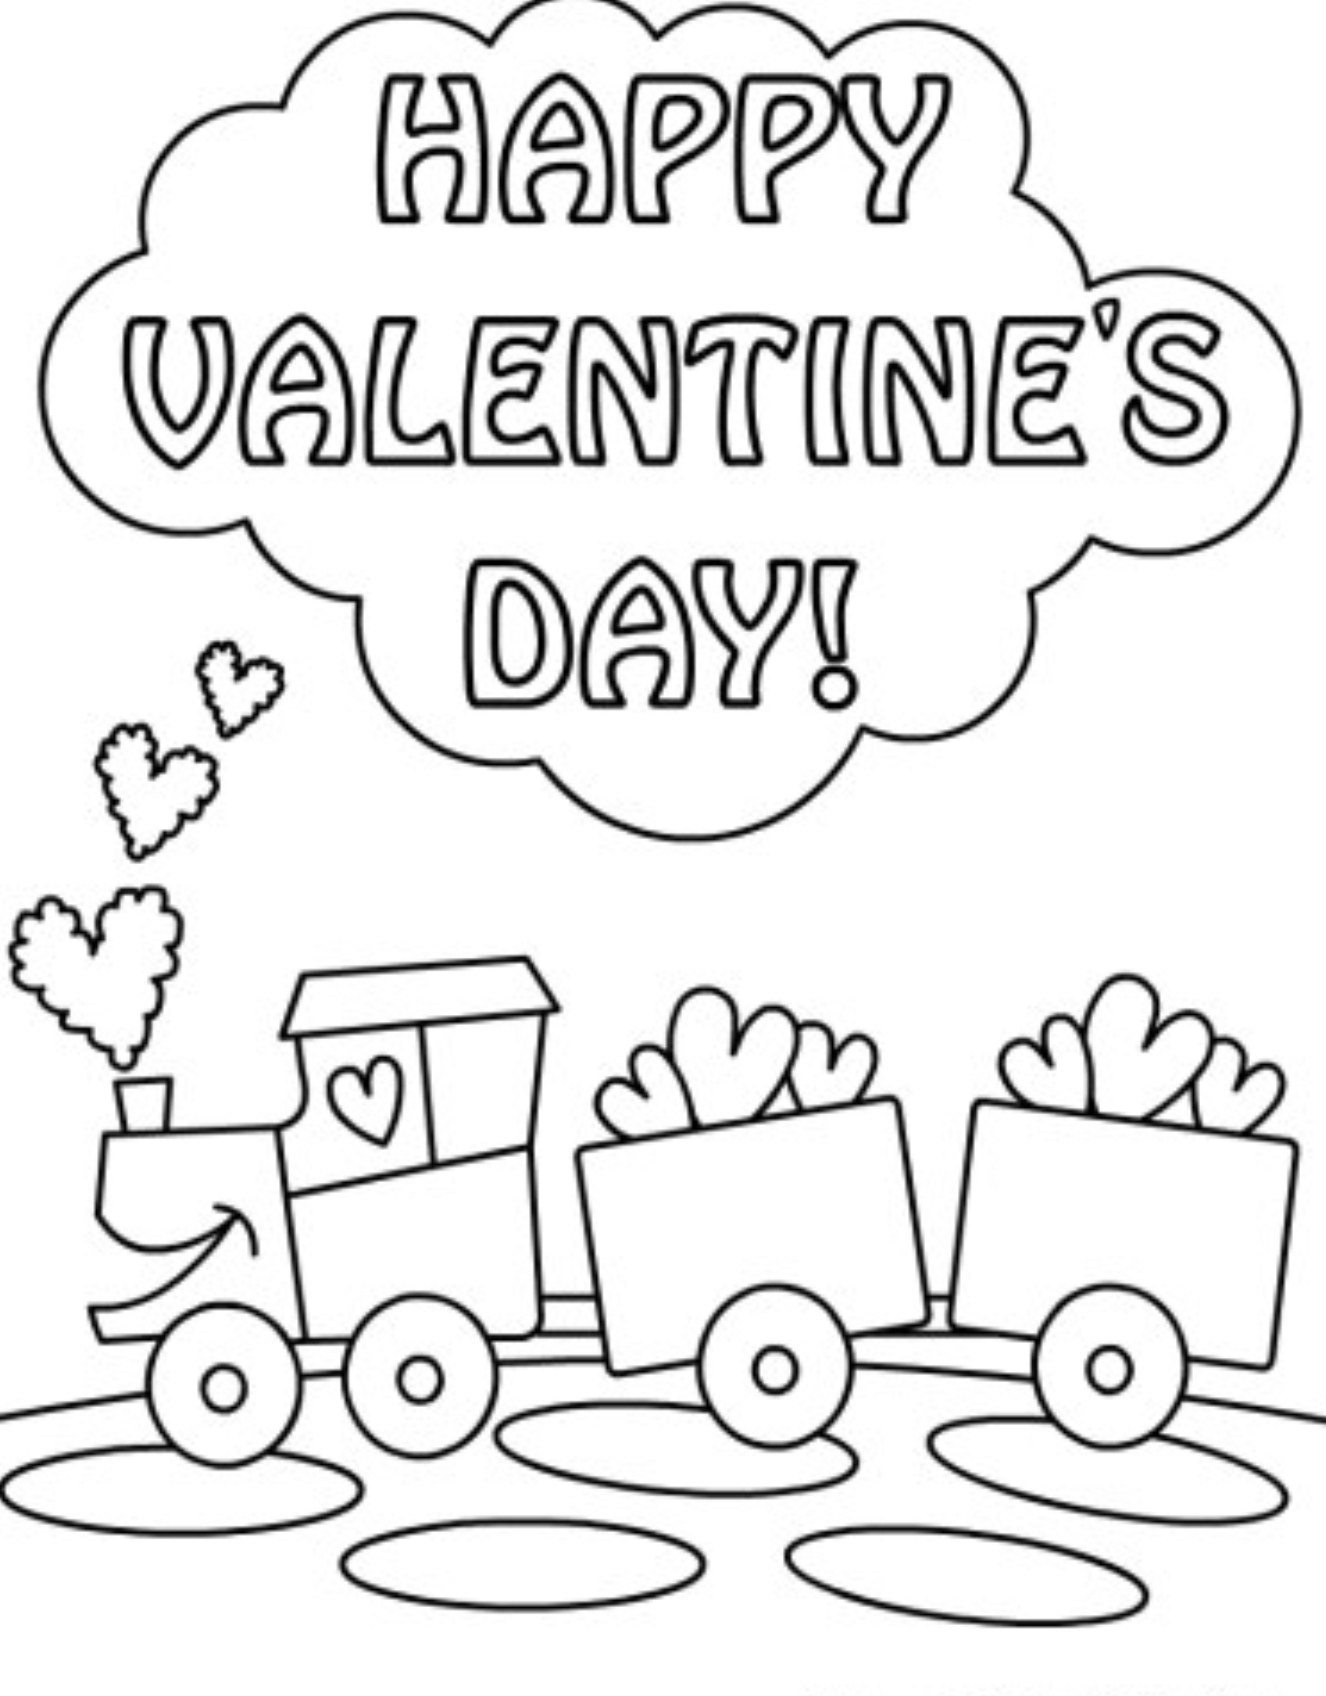 Coloring Pages For Elementary Students Elementary Valentine Coloring Pages